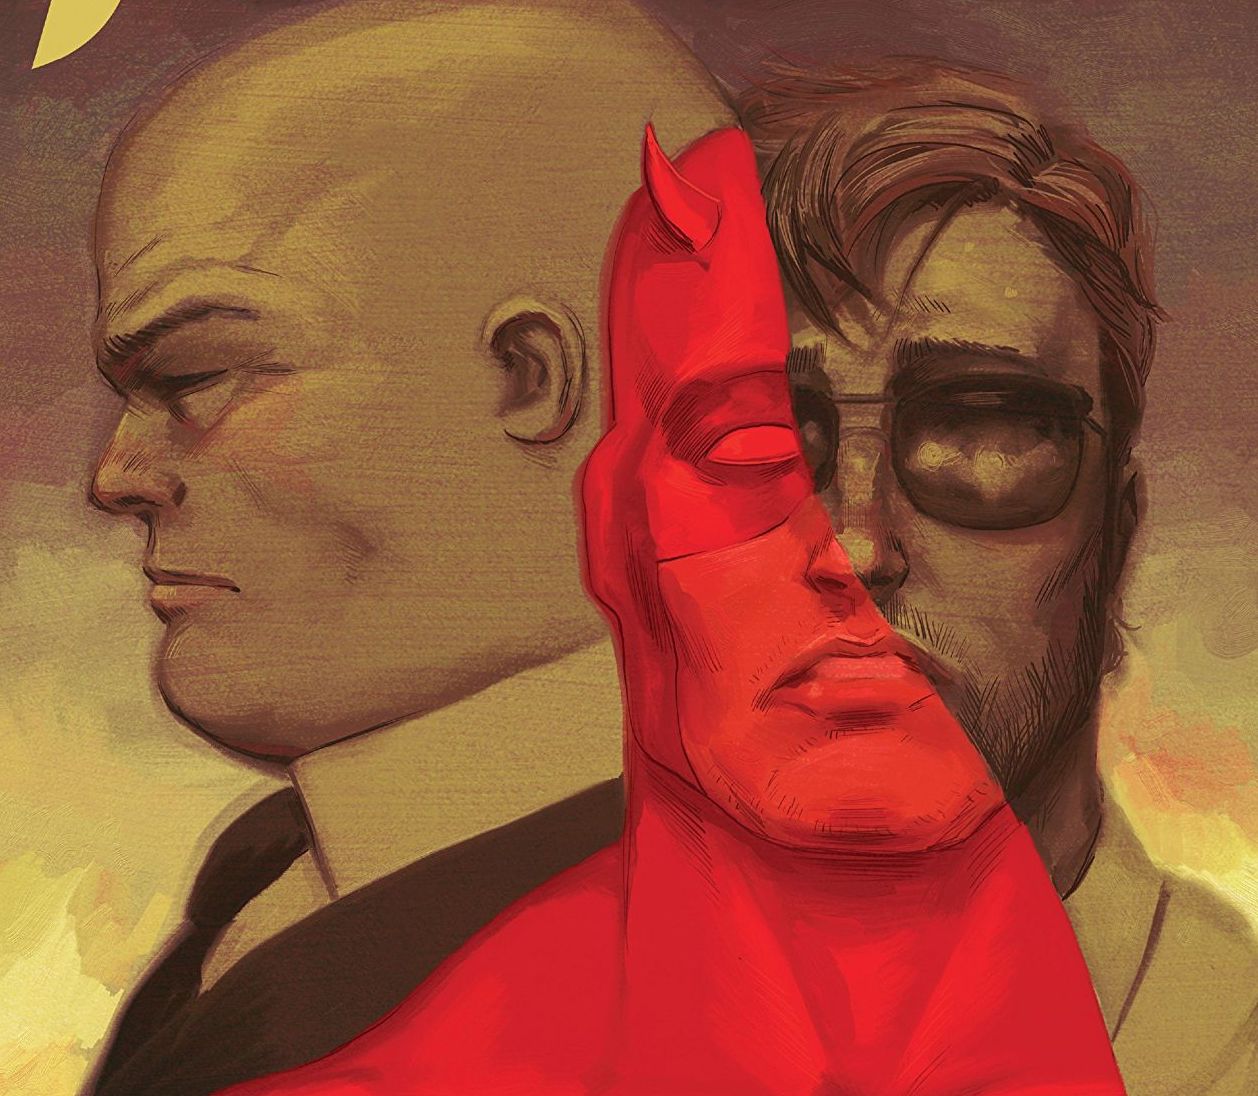 Daredevil #7 review: Too much time for idle hands